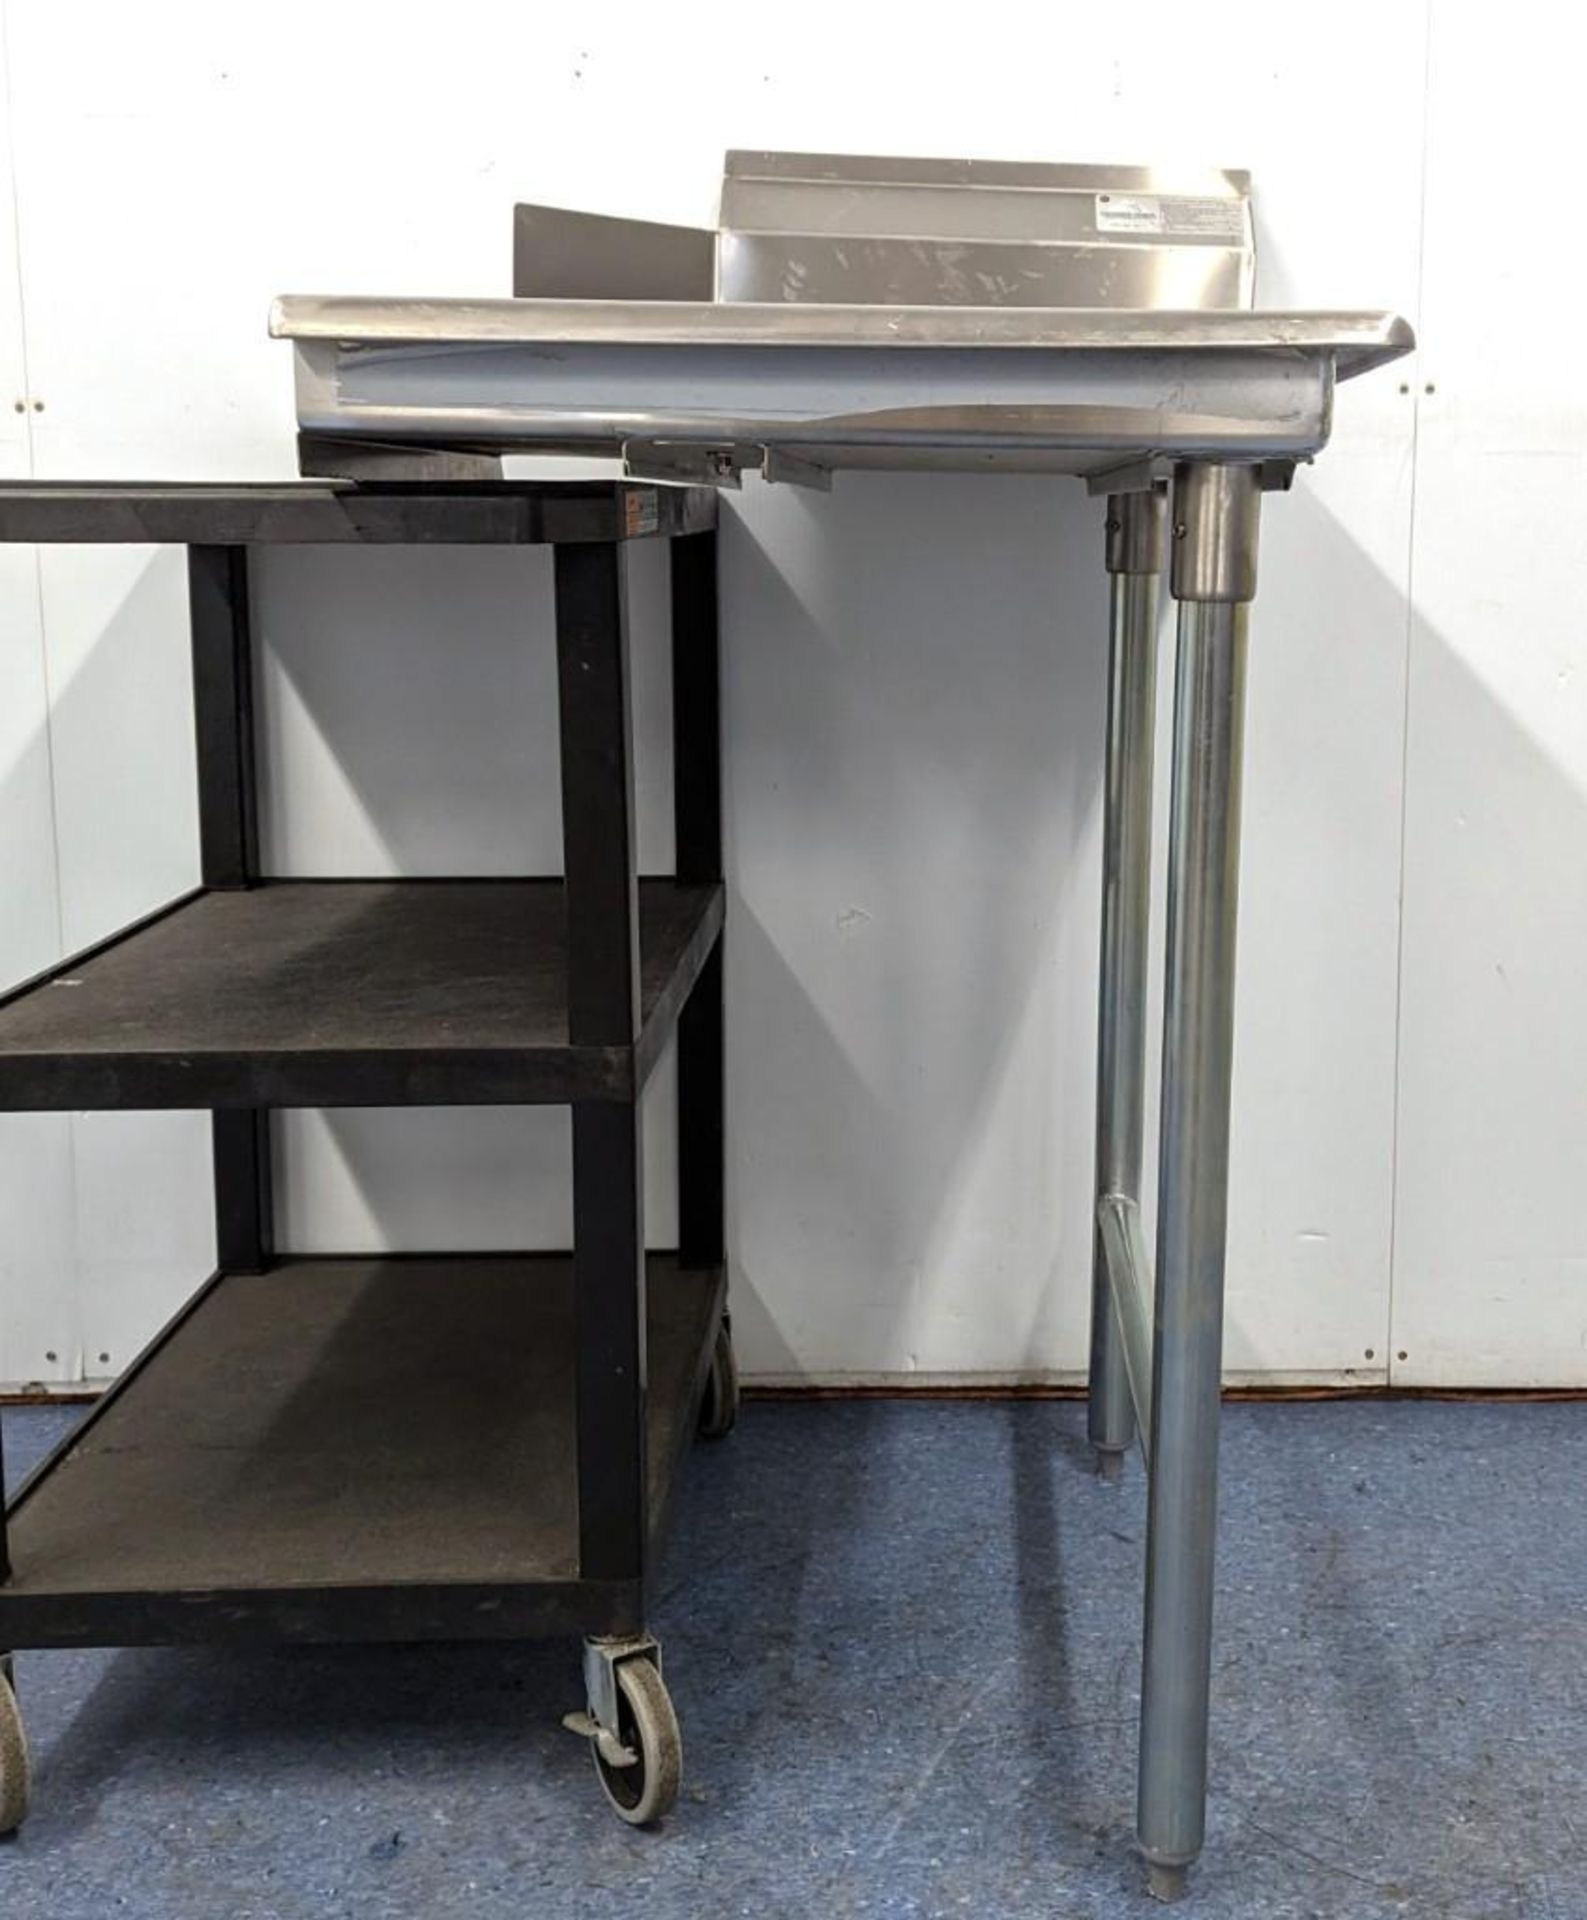 ADVANCE TABCO STAINLESS STEEL SOILED DISHTABLE 35" LEFT SIDE & STRAIGHT CLEAN DISHTABLE 23" RIGHT SI - Image 14 of 18